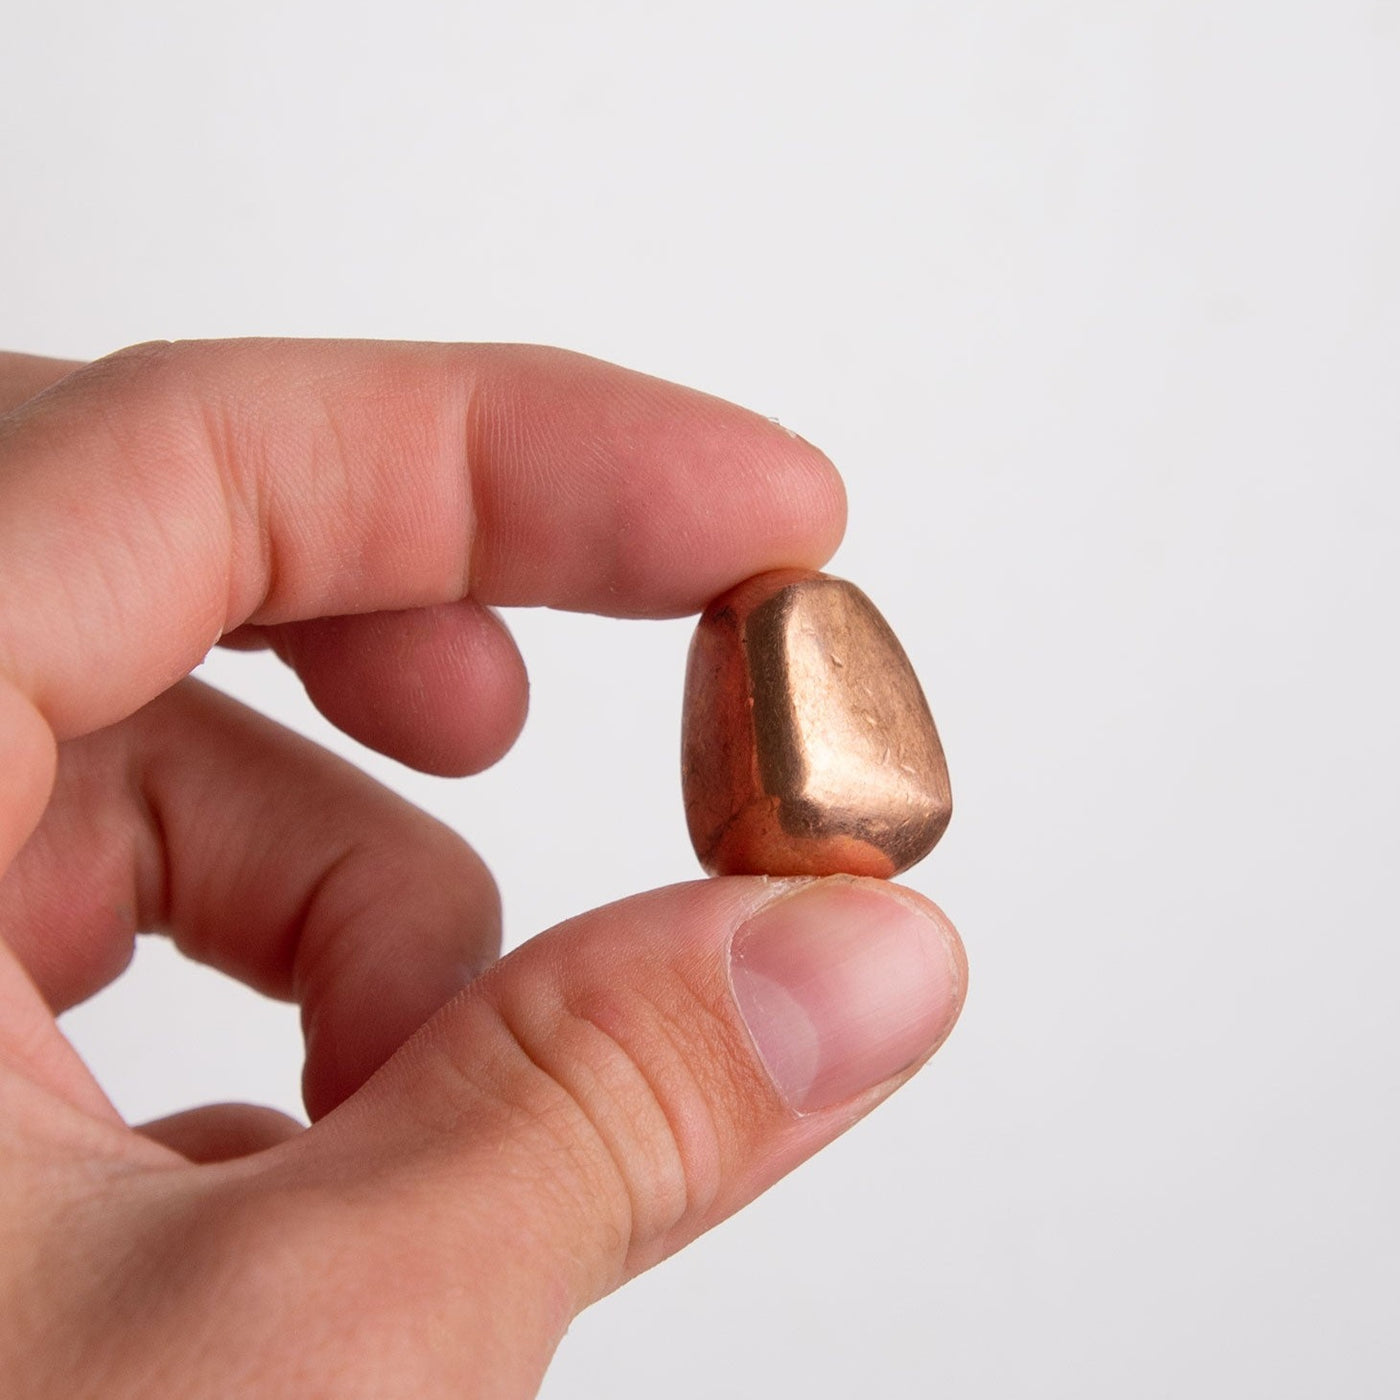 Man holding one copper tumbled stone in his hand to show size by Energy Muse 